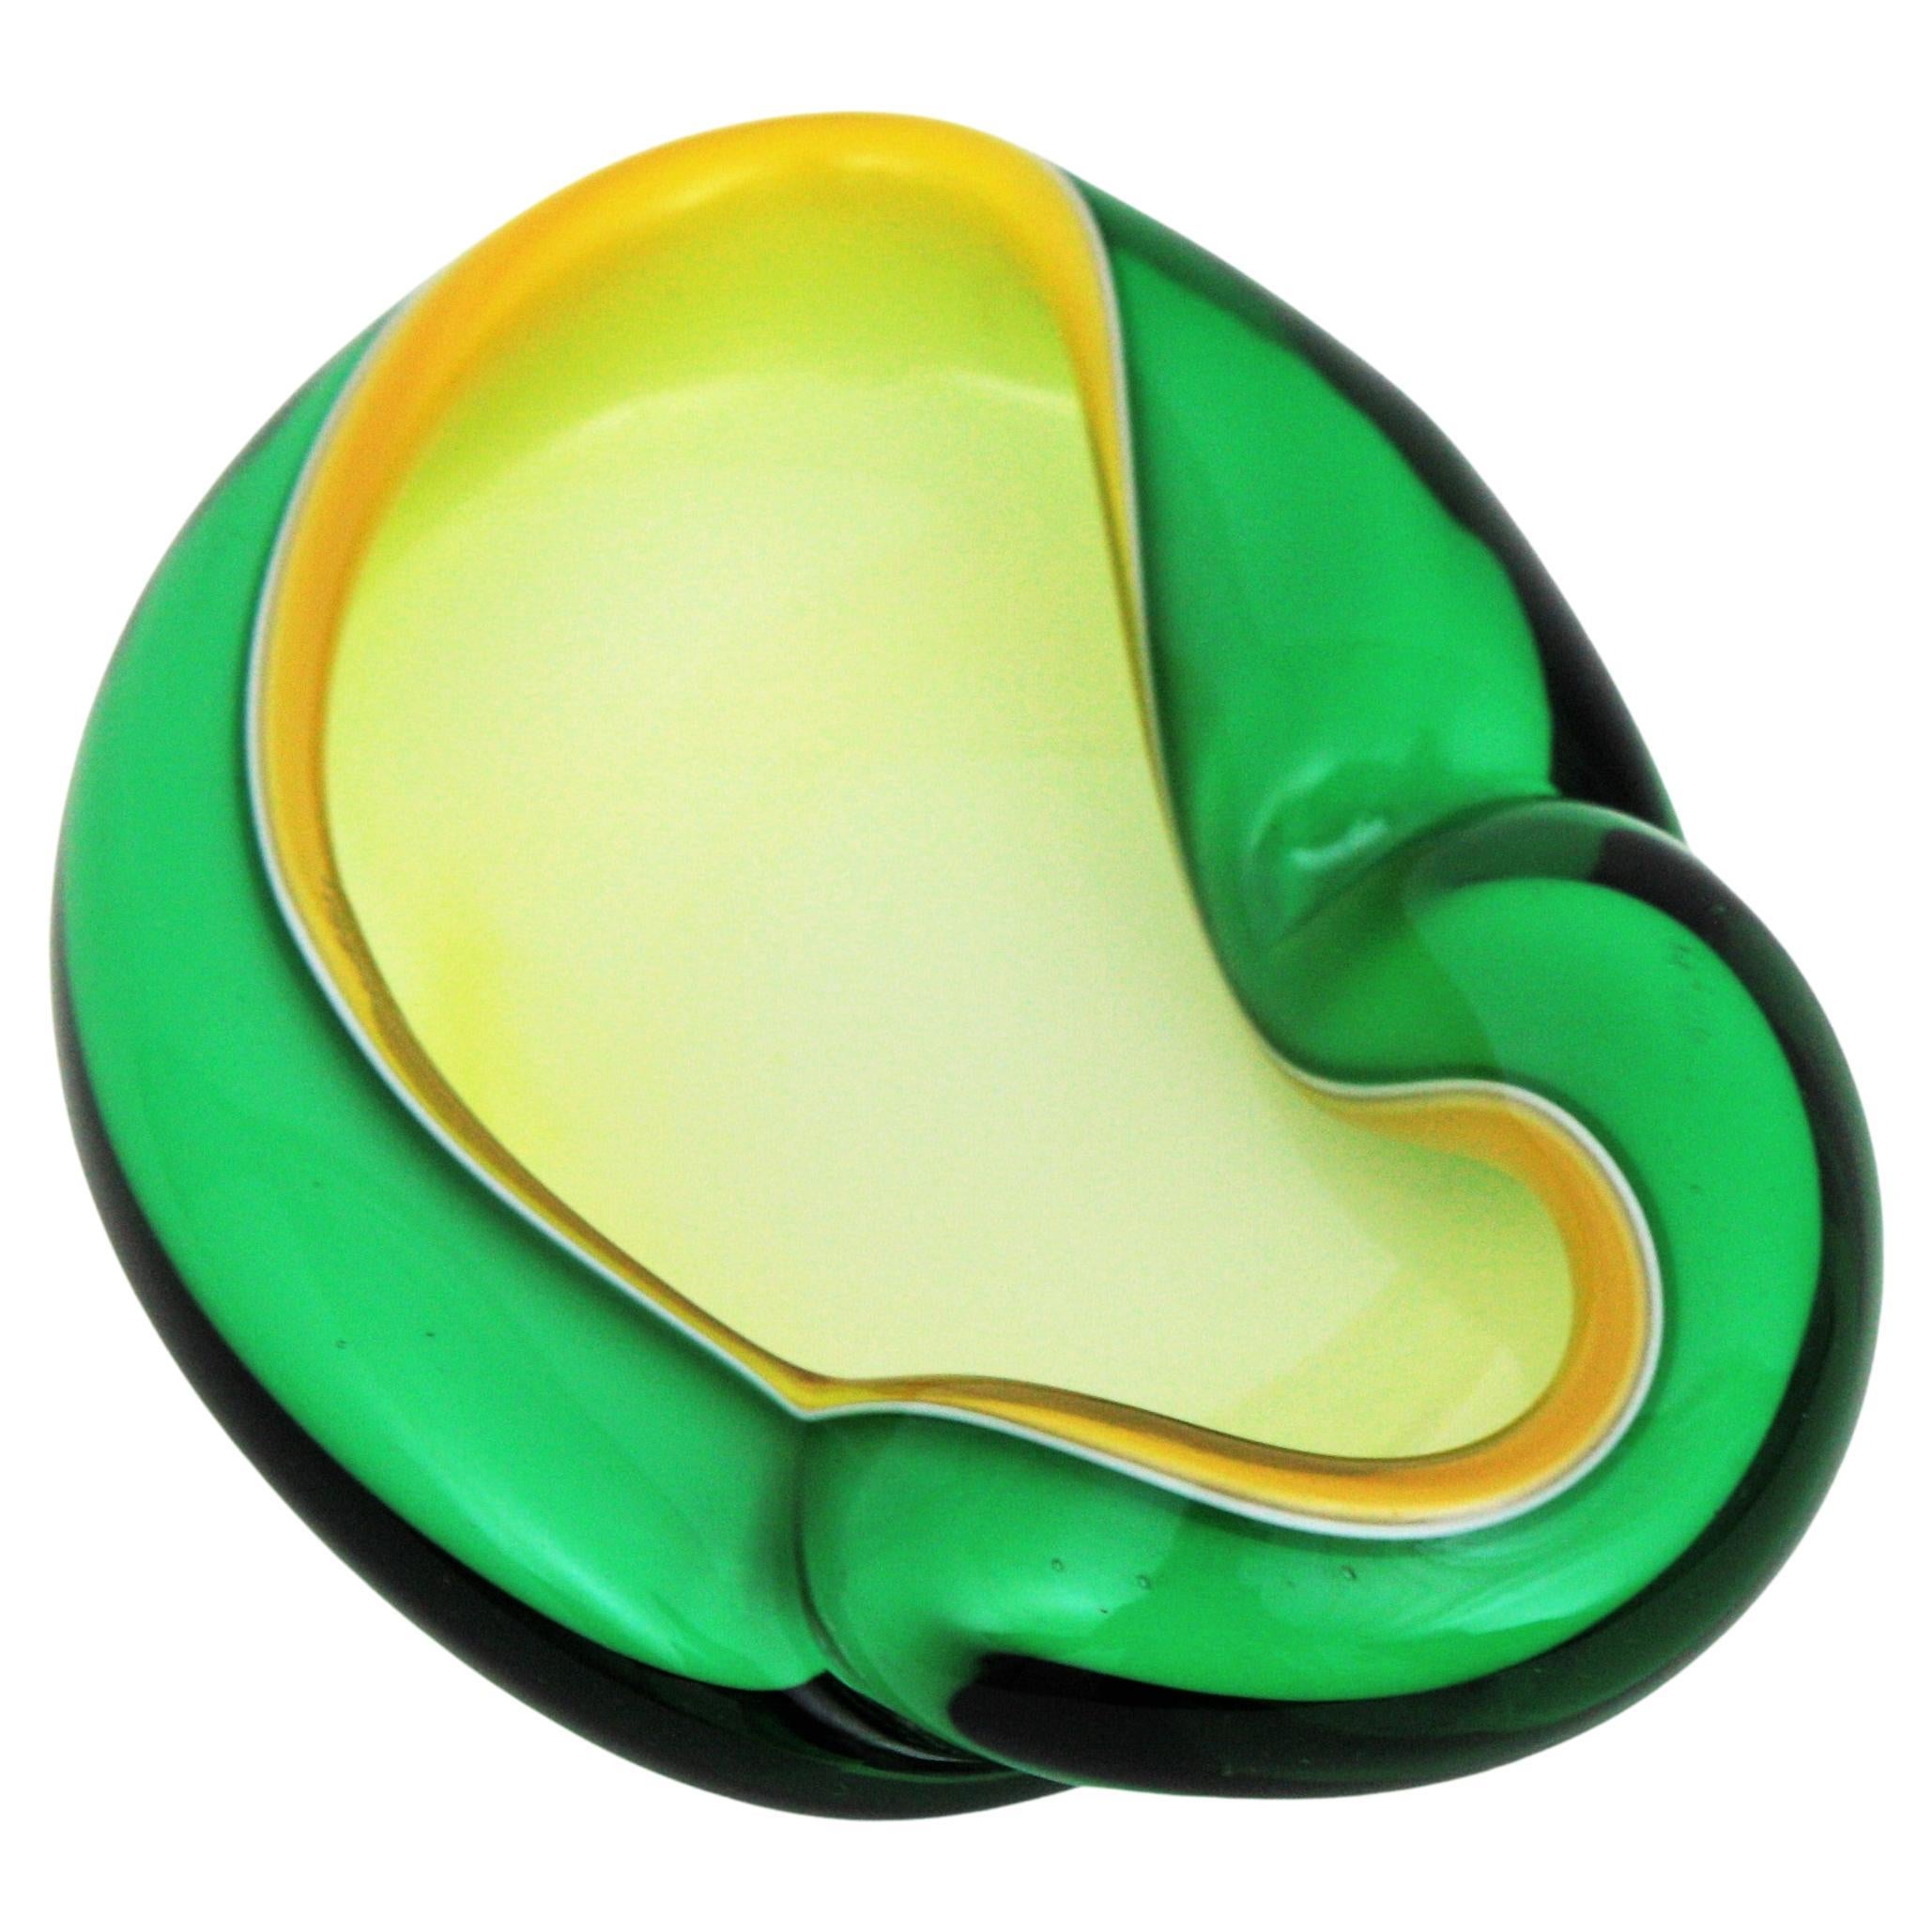 Eye-catching and colorful Murano hand blown green, yellow and white Italian art glass bowl or ashtray with folded rim. Attributed to designer Alfredo Barbini.
This asymmetric and biomorphic bowl has amazing shapes and colors using the Sommerso